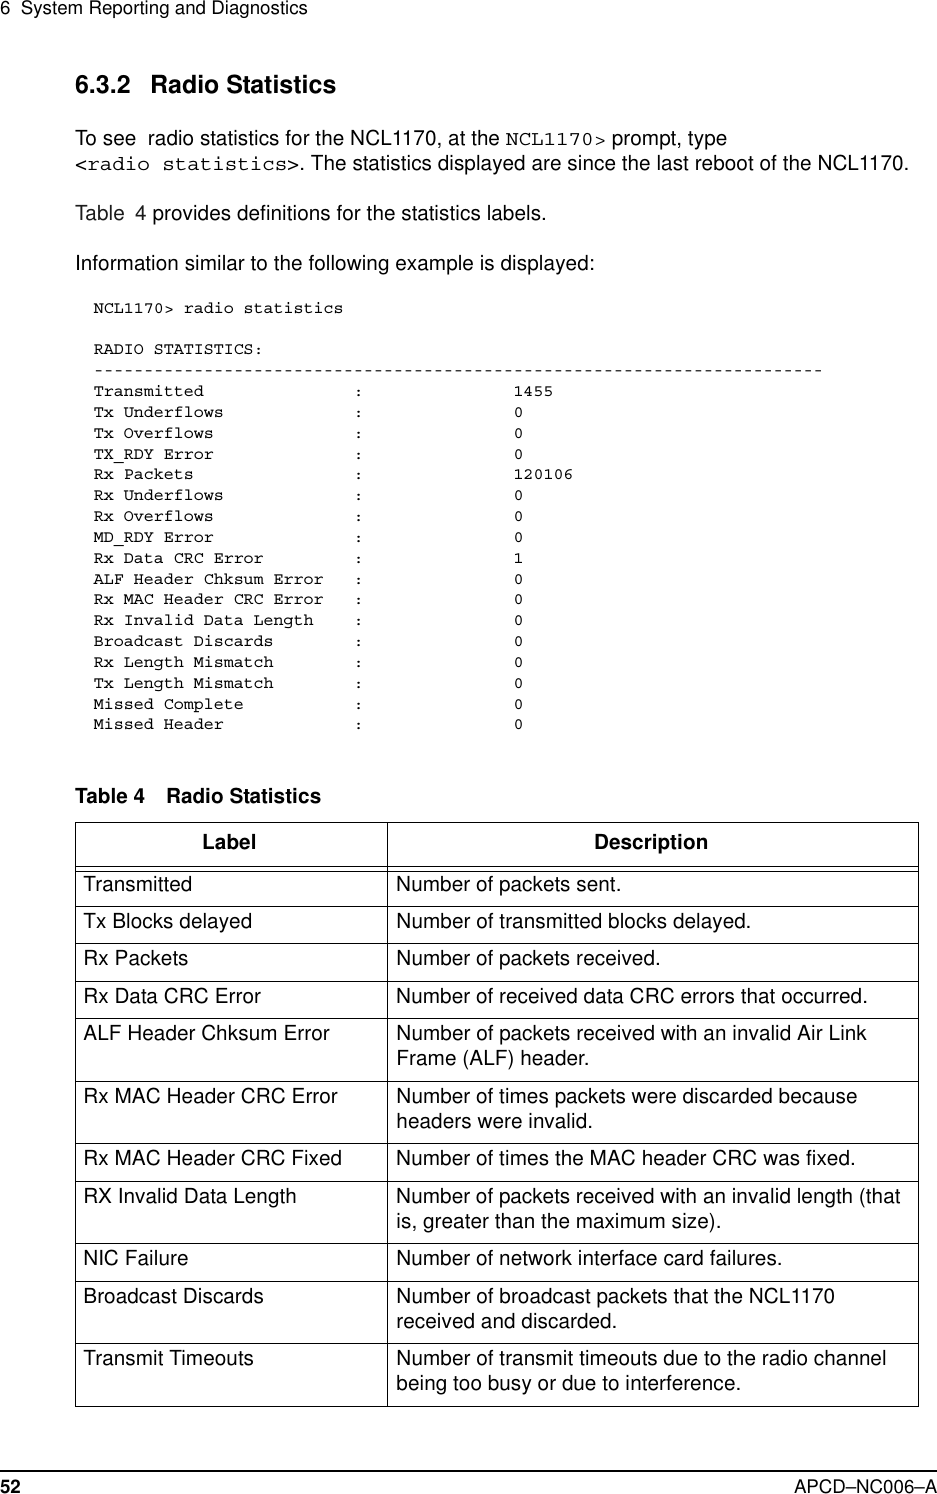 6 System Reporting and Diagnostics52 APCD–NC006–A6.3.2 Radio StatisticsTo see radio statistics for the NCL1170, at the NCL1170&gt; prompt, type&lt;radio statistics&gt;. The statistics displayed are since the last reboot of the NCL1170.Table 4 provides definitions for the statistics labels.Information similar to the following example is displayed:NCL1170&gt; radio statisticsRADIO STATISTICS:-------------------------------------------------------------------------Transmitted : 1455Tx Underflows : 0Tx Overflows : 0TX_RDY Error : 0Rx Packets : 120106Rx Underflows : 0Rx Overflows : 0MD_RDY Error : 0Rx Data CRC Error : 1ALF Header Chksum Error : 0Rx MAC Header CRC Error : 0Rx Invalid Data Length : 0Broadcast Discards : 0Rx Length Mismatch : 0Tx Length Mismatch : 0Missed Complete : 0Missed Header : 0Table 4 Radio StatisticsLabel DescriptionTransmitted Number of packets sent.Tx Blocks delayed Number of transmitted blocks delayed.Rx Packets Number of packets received.Rx Data CRC Error Number of received data CRC errors that occurred.ALF Header Chksum Error Number of packets received with an invalid Air LinkFrame (ALF) header.Rx MAC Header CRC Error Number of times packets were discarded becauseheaders were invalid.Rx MAC Header CRC Fixed Number of times the MAC header CRC was fixed.RX Invalid Data Length Number of packets received with an invalid length (thatis, greater than the maximum size).NIC Failure Number of network interface card failures.Broadcast Discards Number of broadcast packets that the NCL1170received and discarded.Transmit Timeouts Number of transmit timeouts due to the radio channelbeing too busy or due to interference.